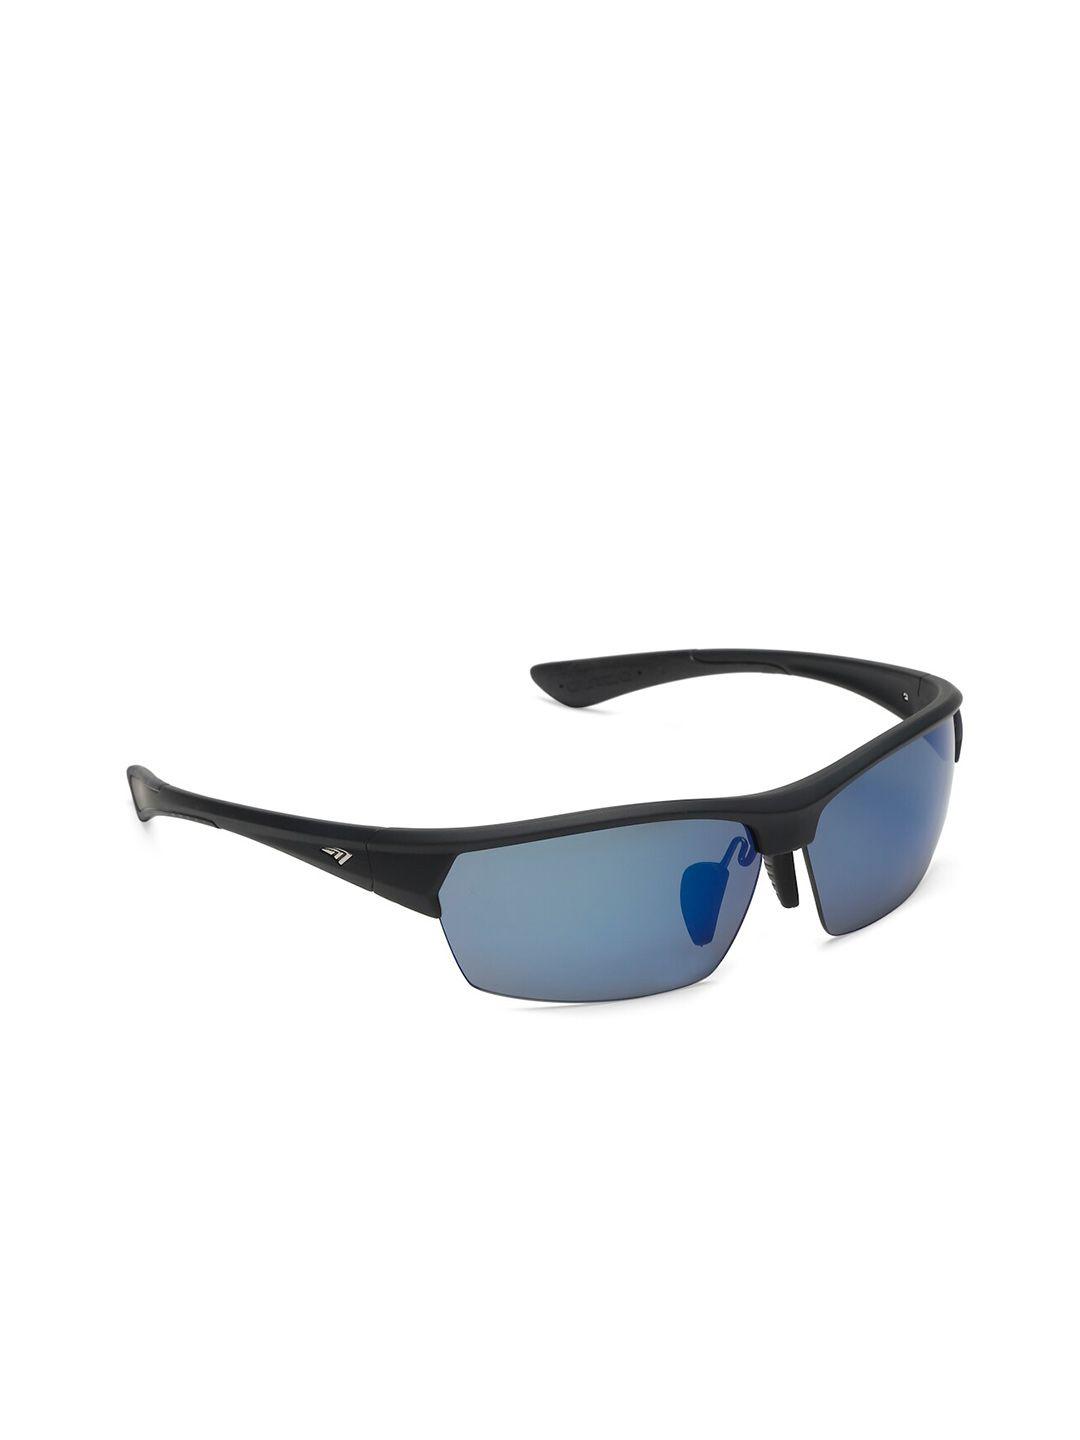 sunnies rectangle lens with polarised and uv protected sunglasses